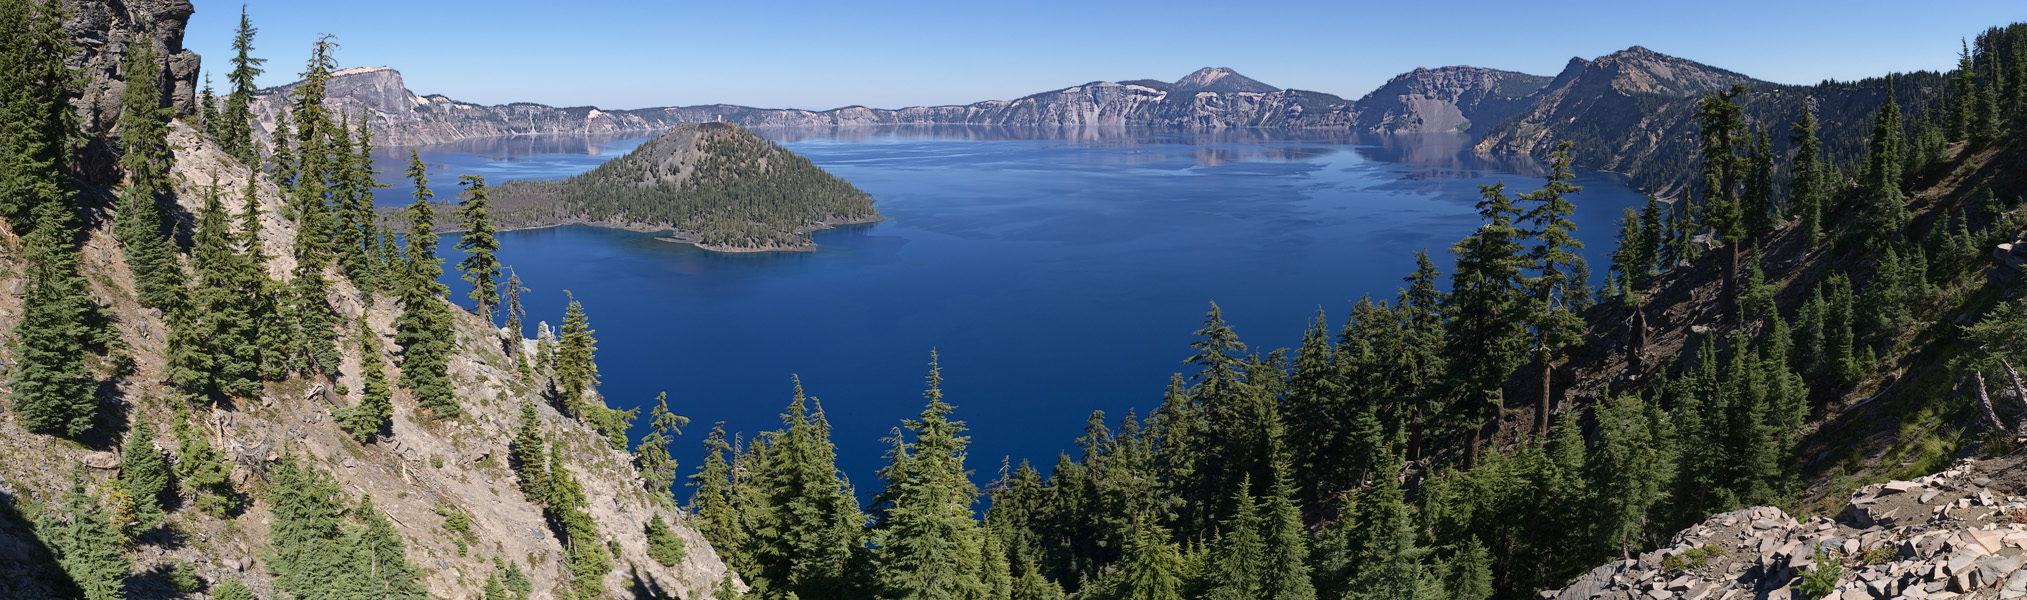 Crater Lake from the Southwest